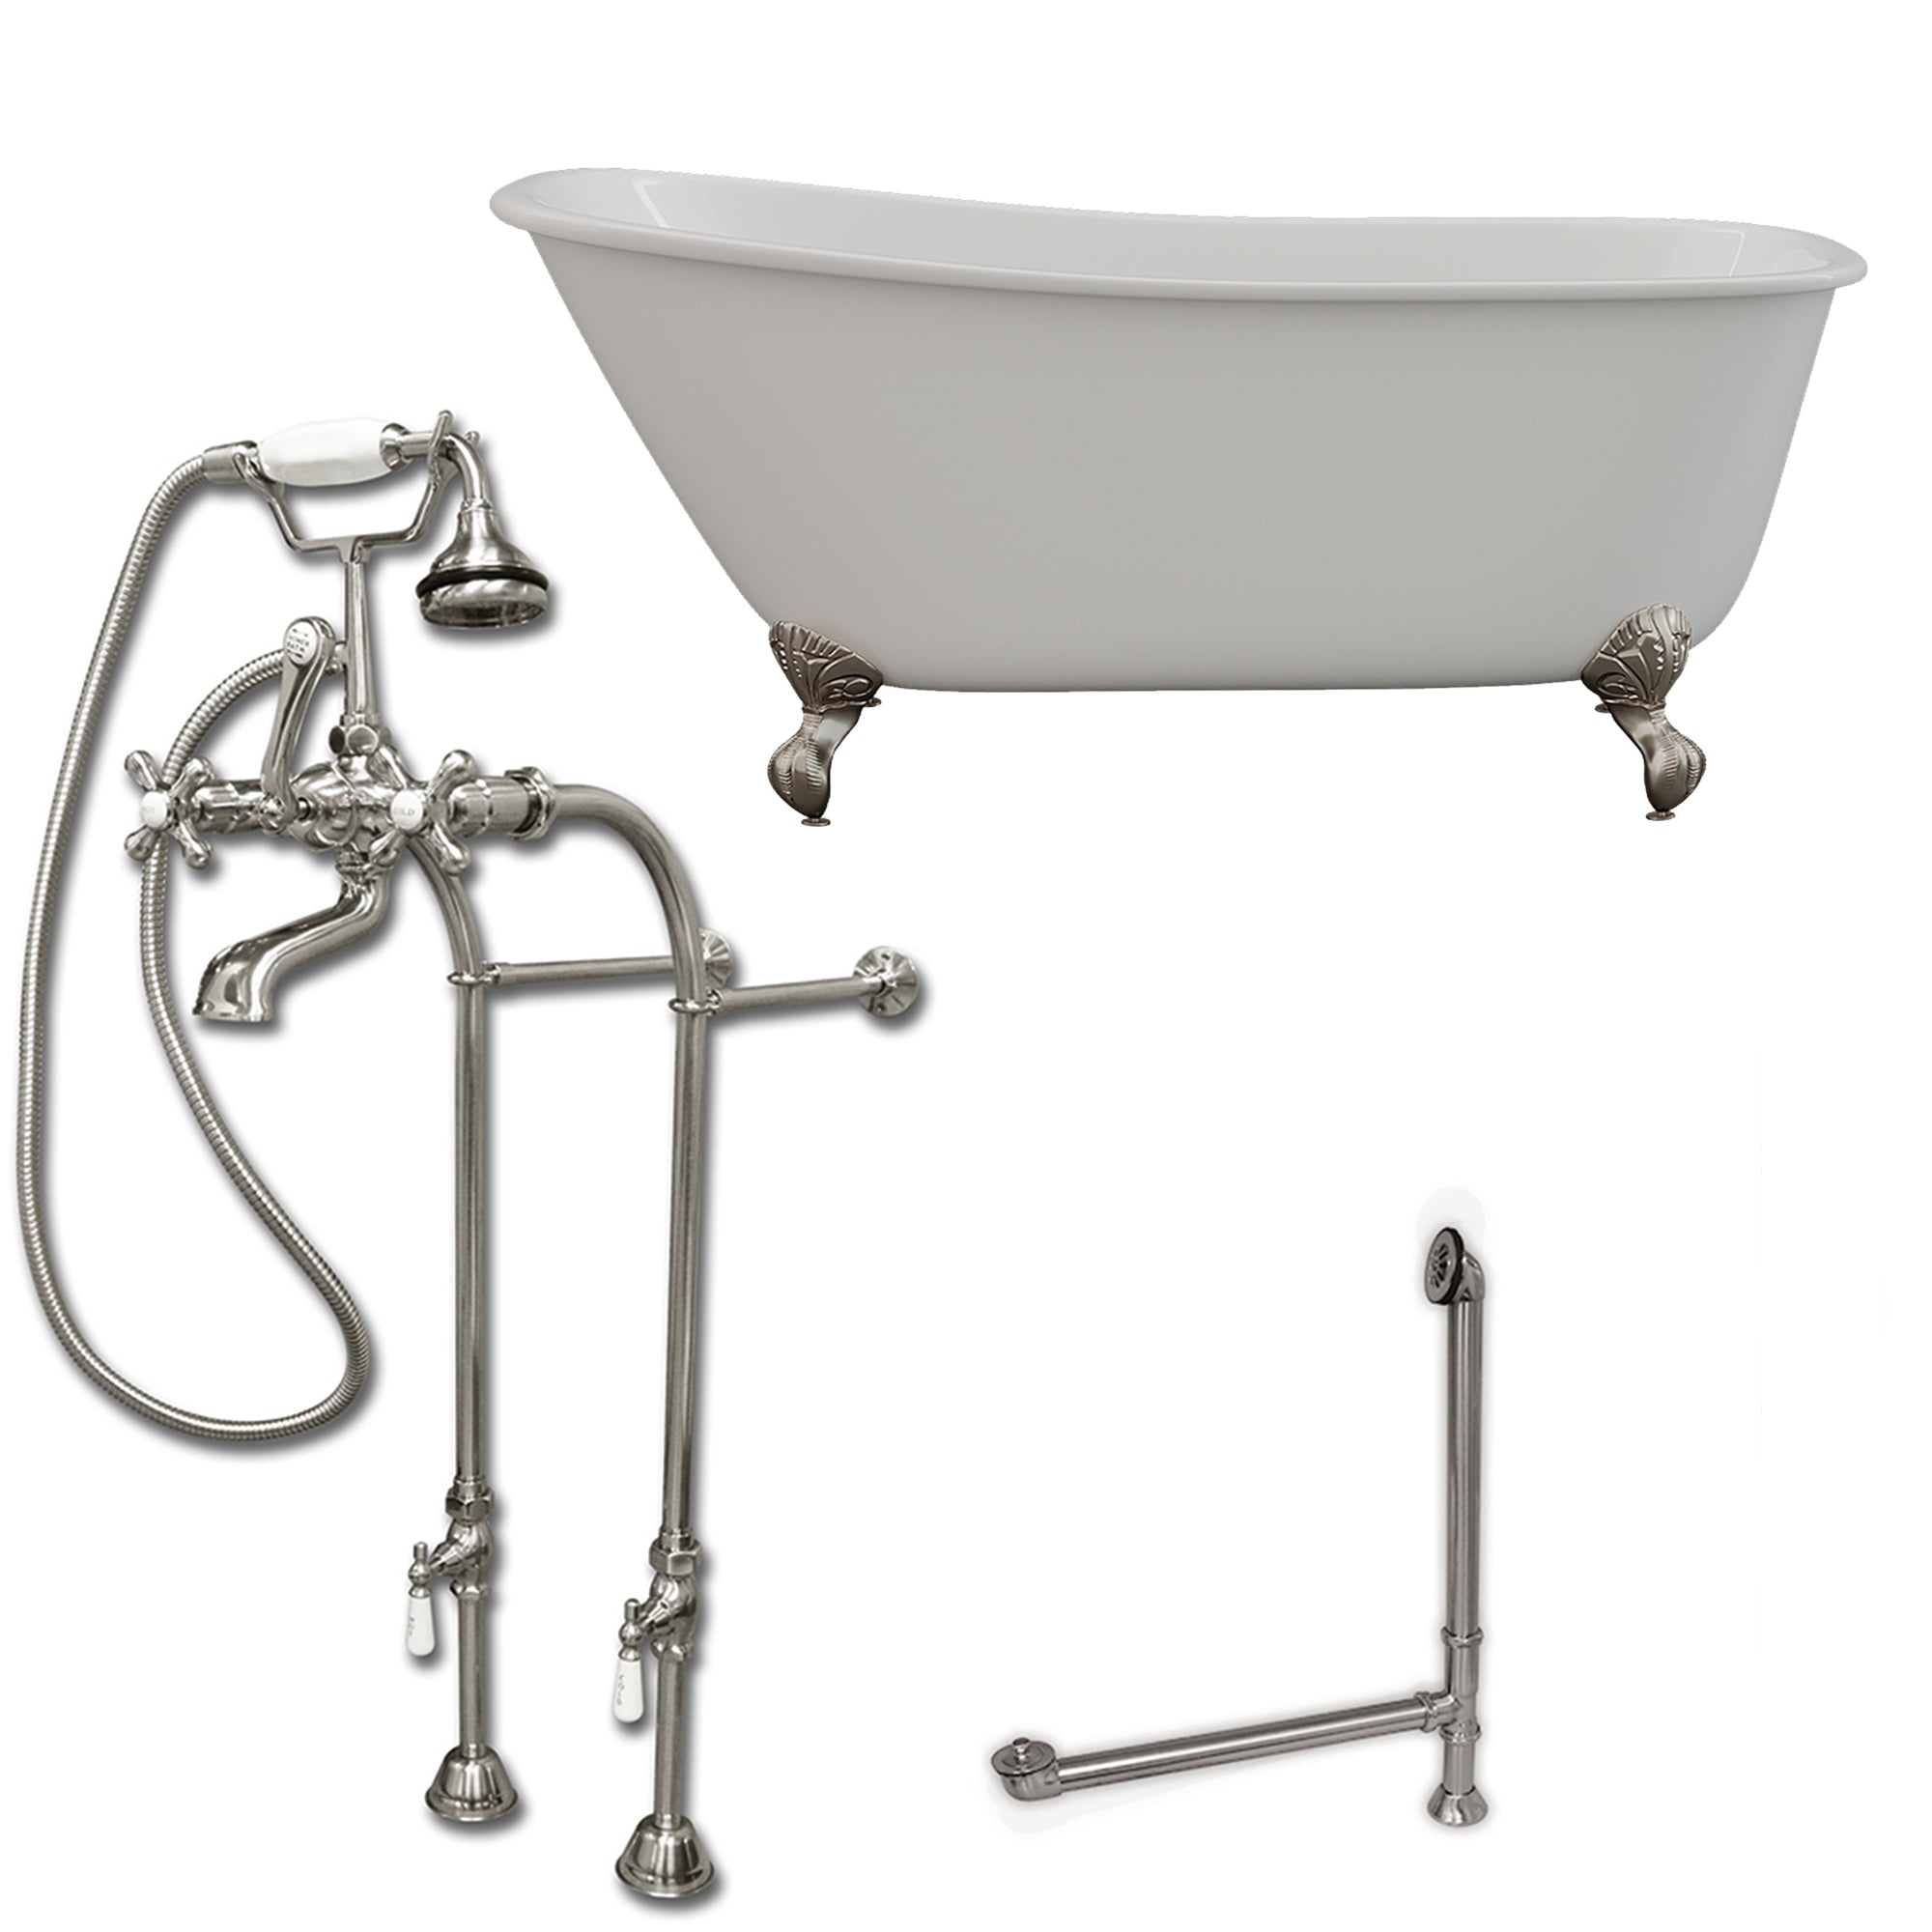 Cambridge Plumbing 58-Inch Swedish Slipper Cast Iron Clawfoot Tub (Porcelain enamel interior and white paint exterior) with Free Standing Plumbing Package (Brushed Nickel) SWED58-398463-PKG-NH - Vital Hydrotherapy